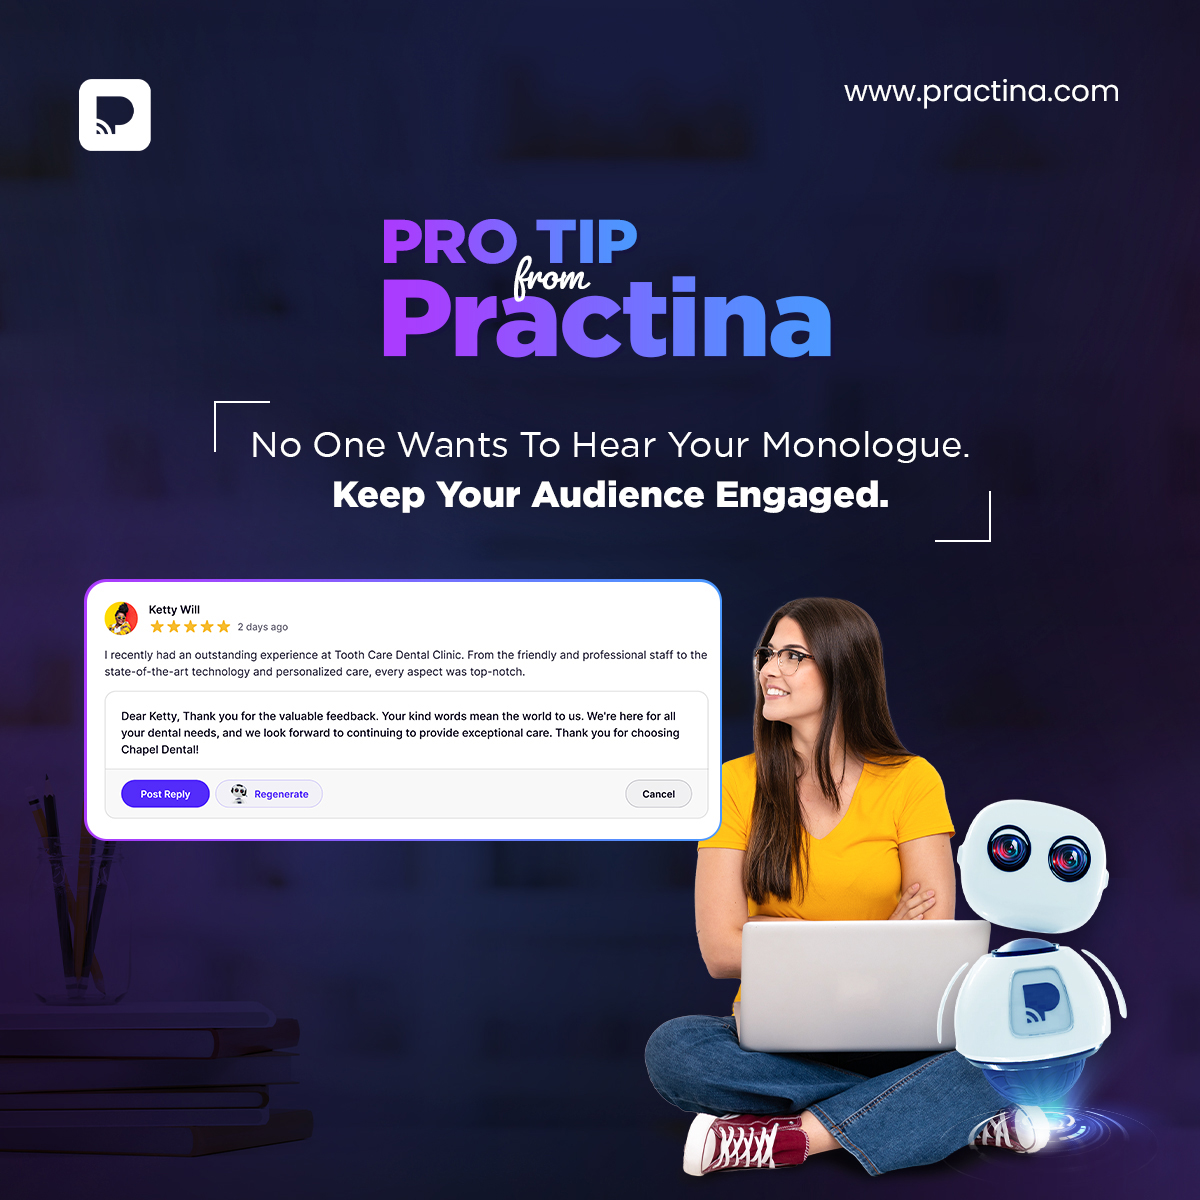 Successful digital marketing isn't just about going on and on about your brand; it's about engaging your audience. And with Practina, it's easy. Whether it's generating content that prompts your audience's reaction or responding to reviews, Practina can do it all!